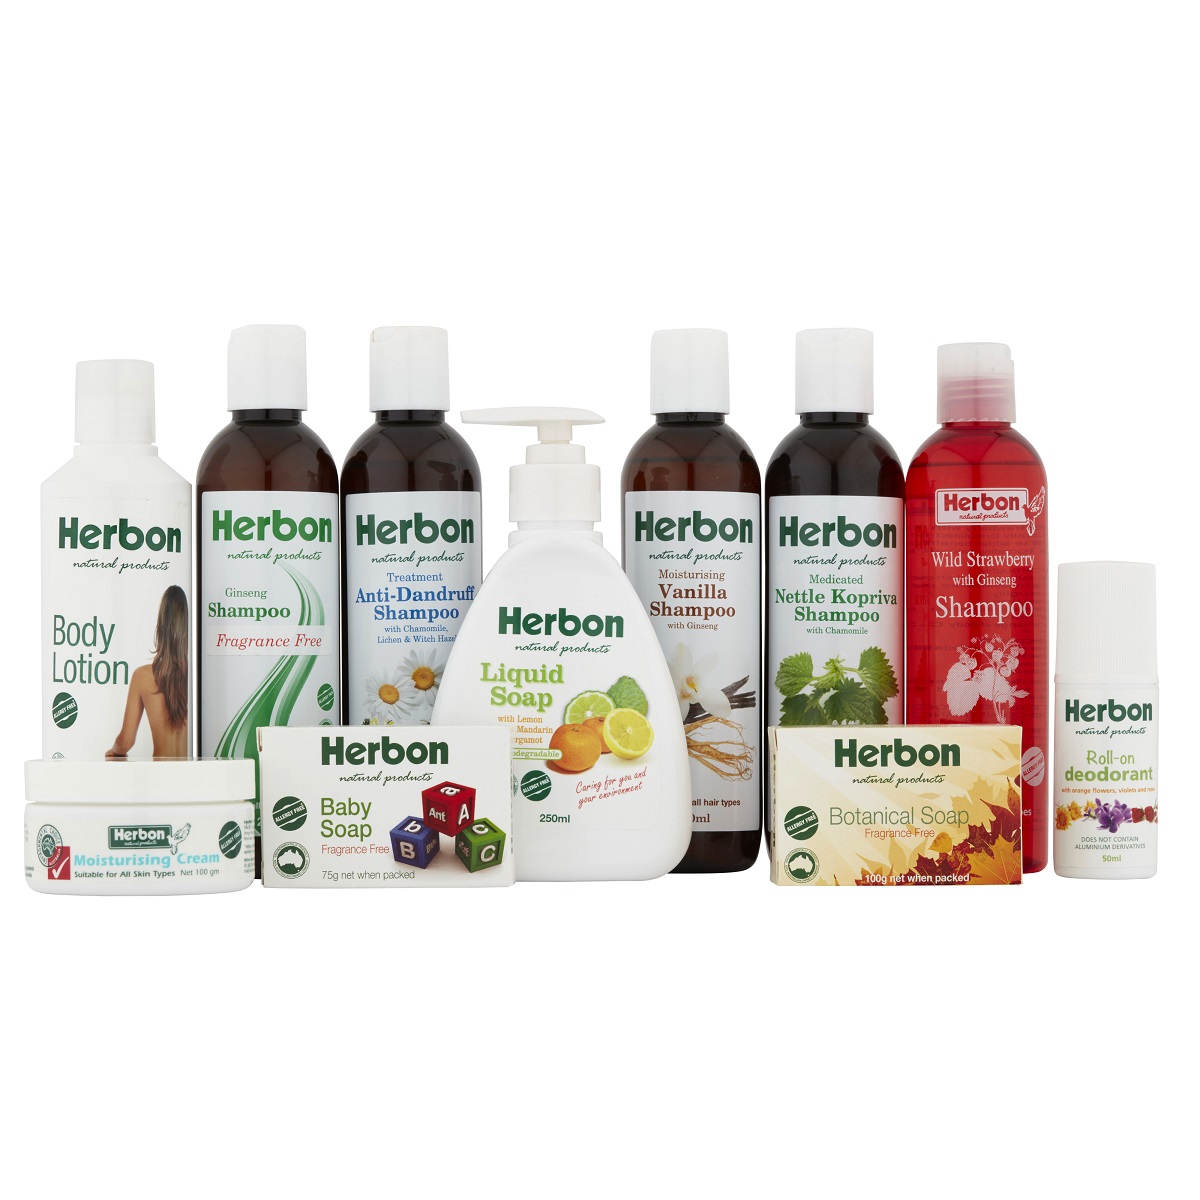 Choice Test – Herbon Pre-Wash Stain Remover